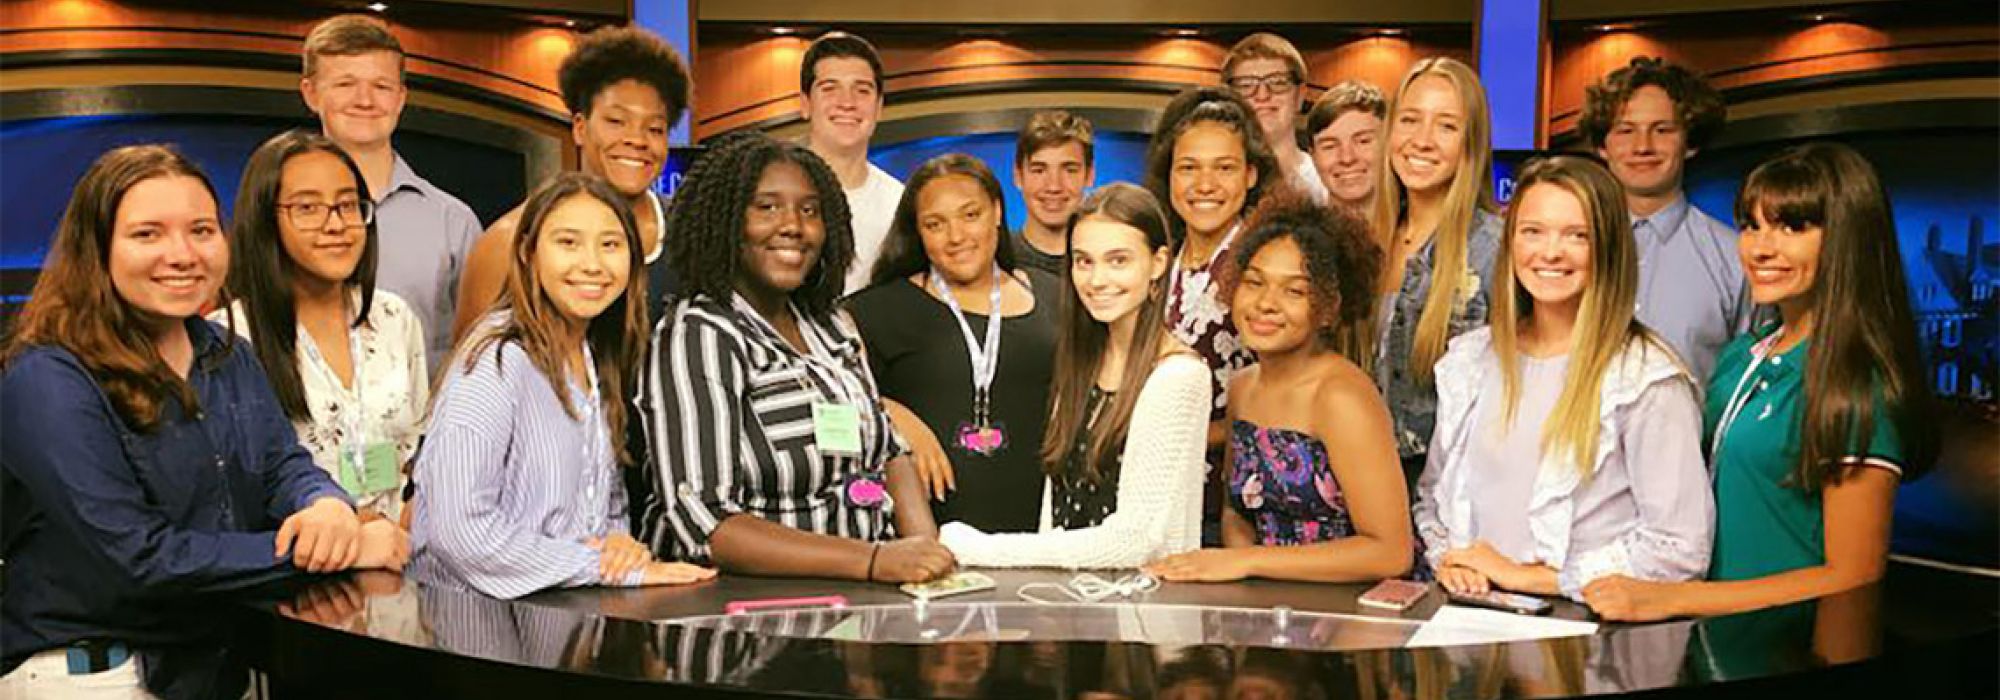 Eighteen young students stand behind the newsdesk on the set of Centre Country Report